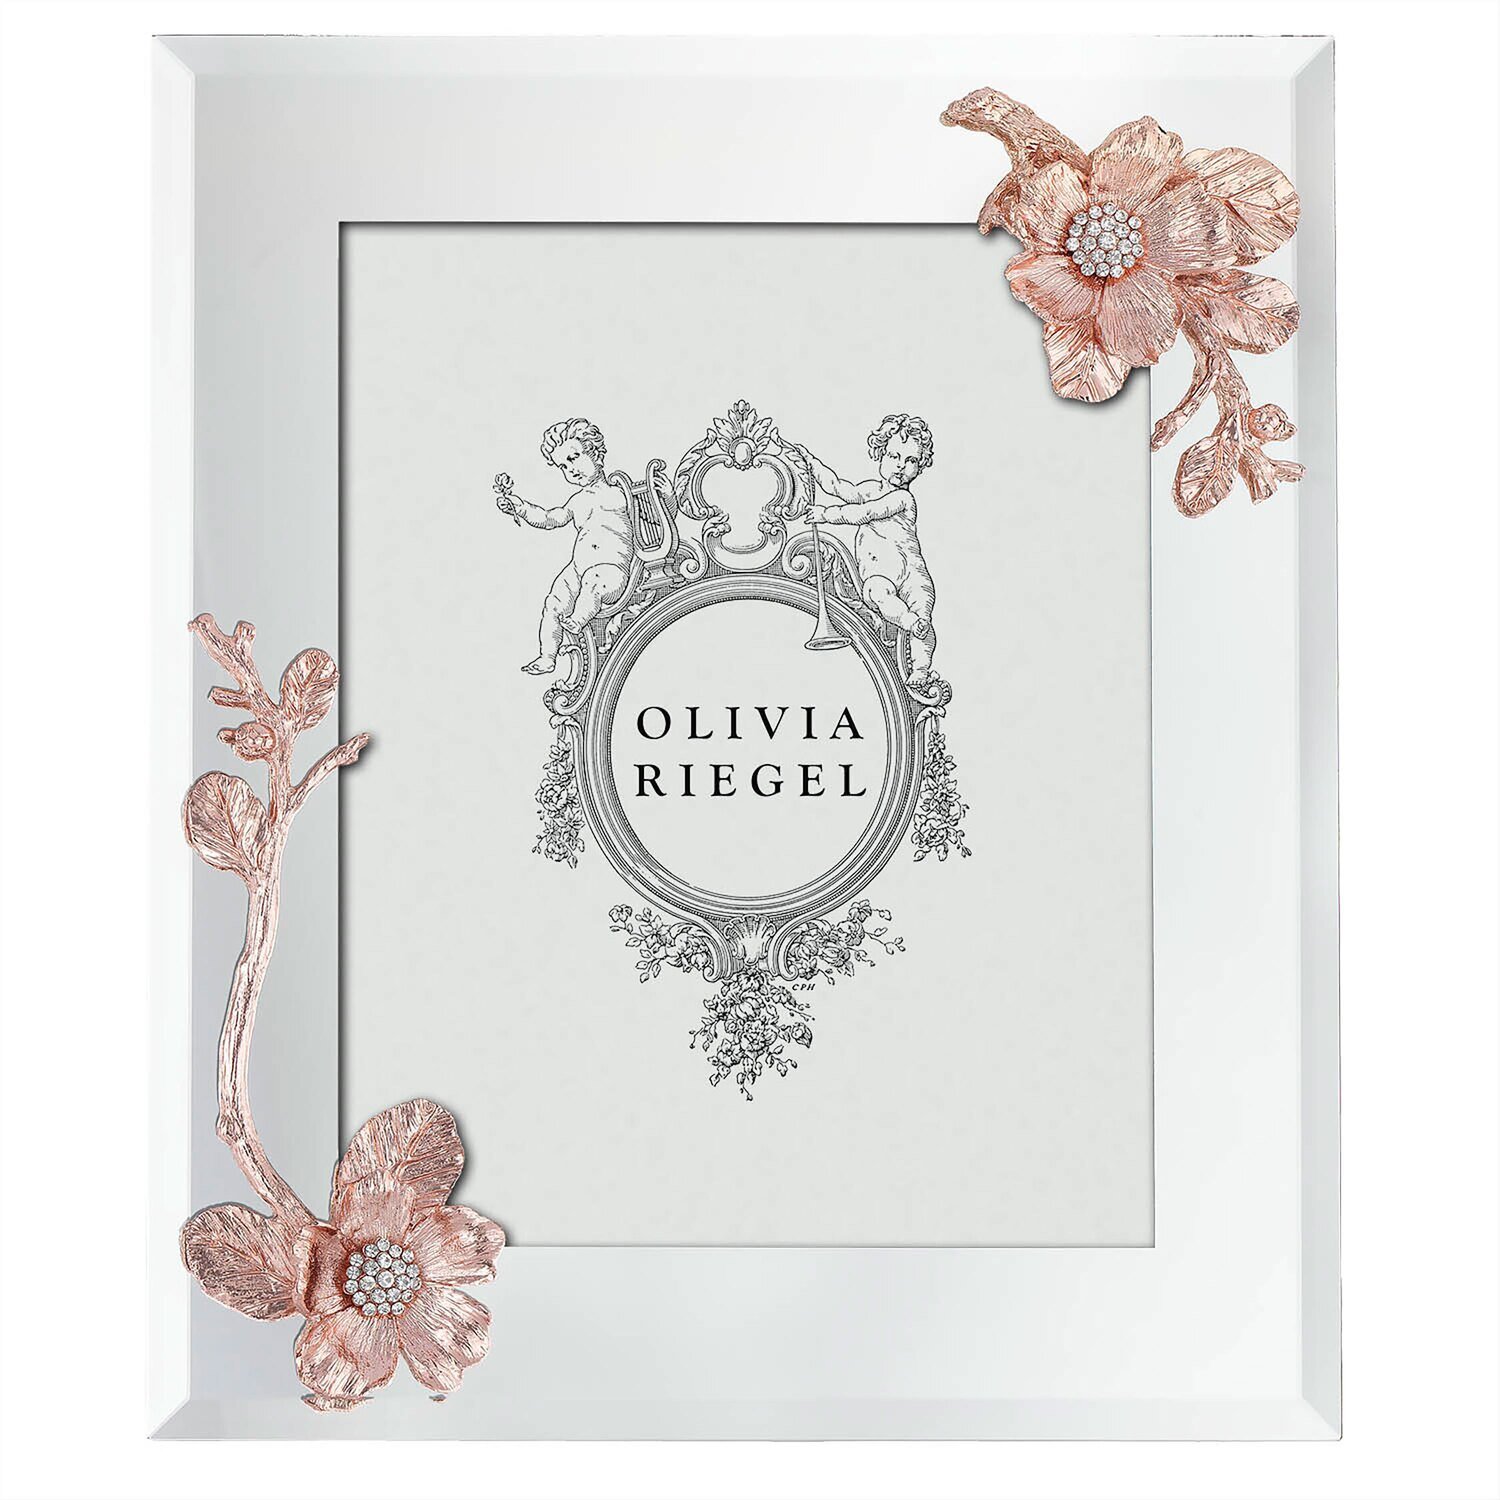 Olivia Riegel Rose Gold Botanica 8 x 10 Inch Picture Frame RT4216